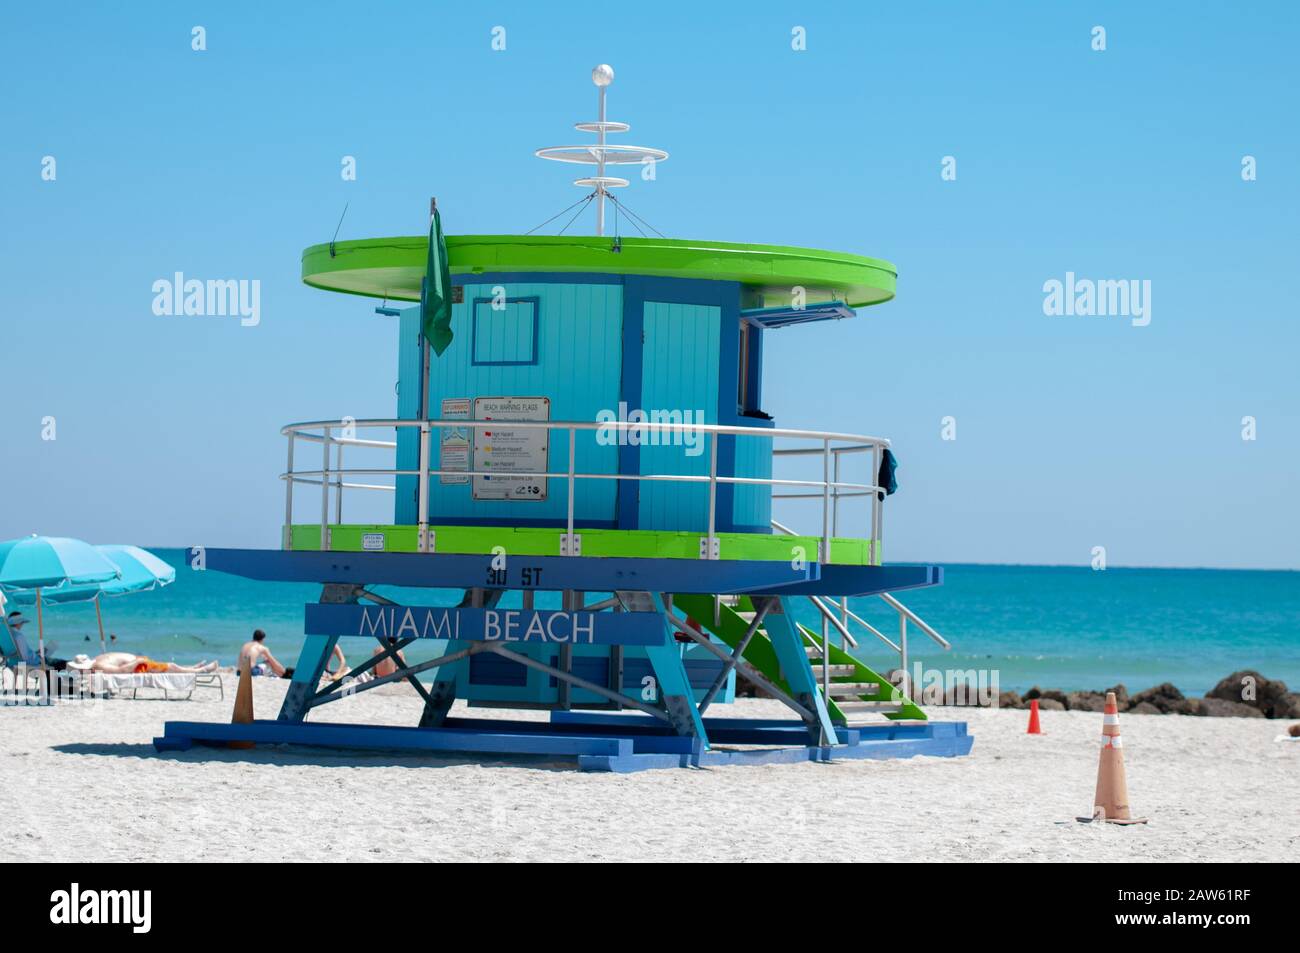 Miami Beach's iconic Art Deco life guard towers against a blue Florida sky. Stock Photo